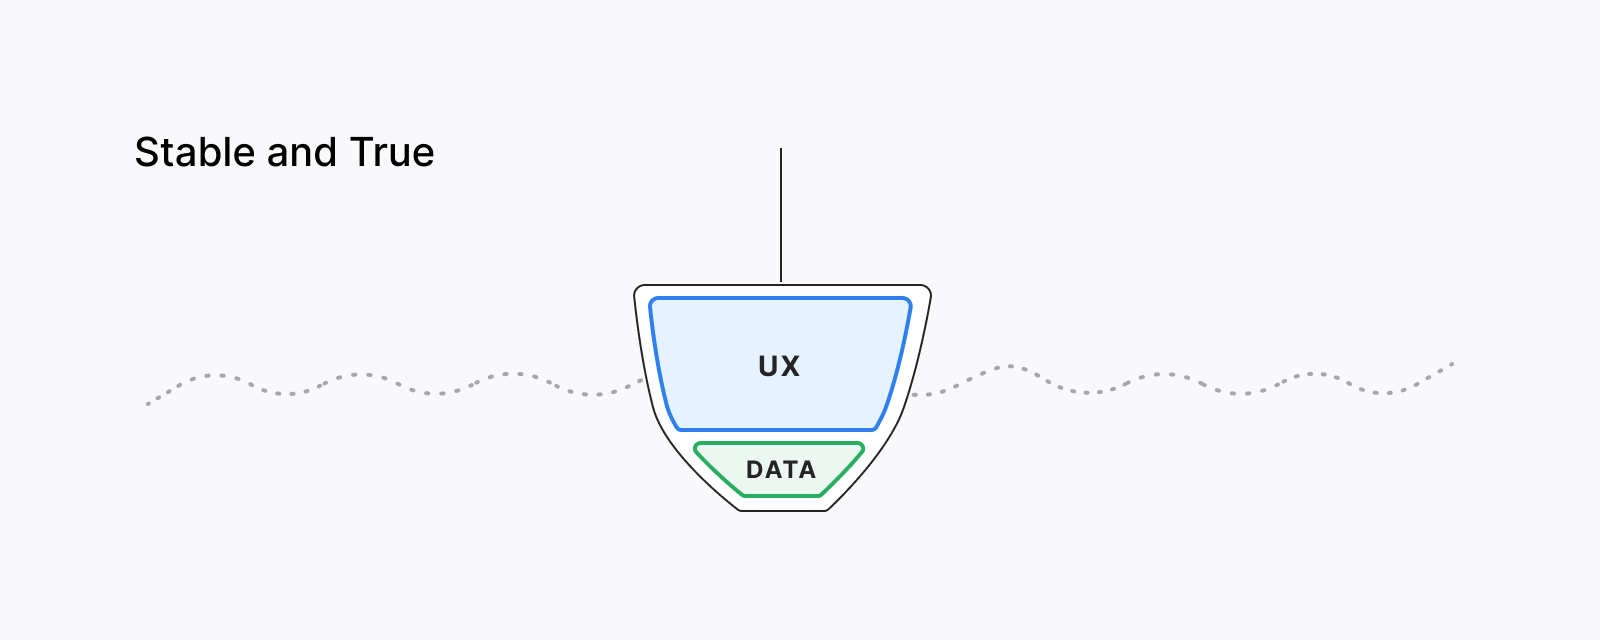 User experience is stable and true with the minimal amount of data